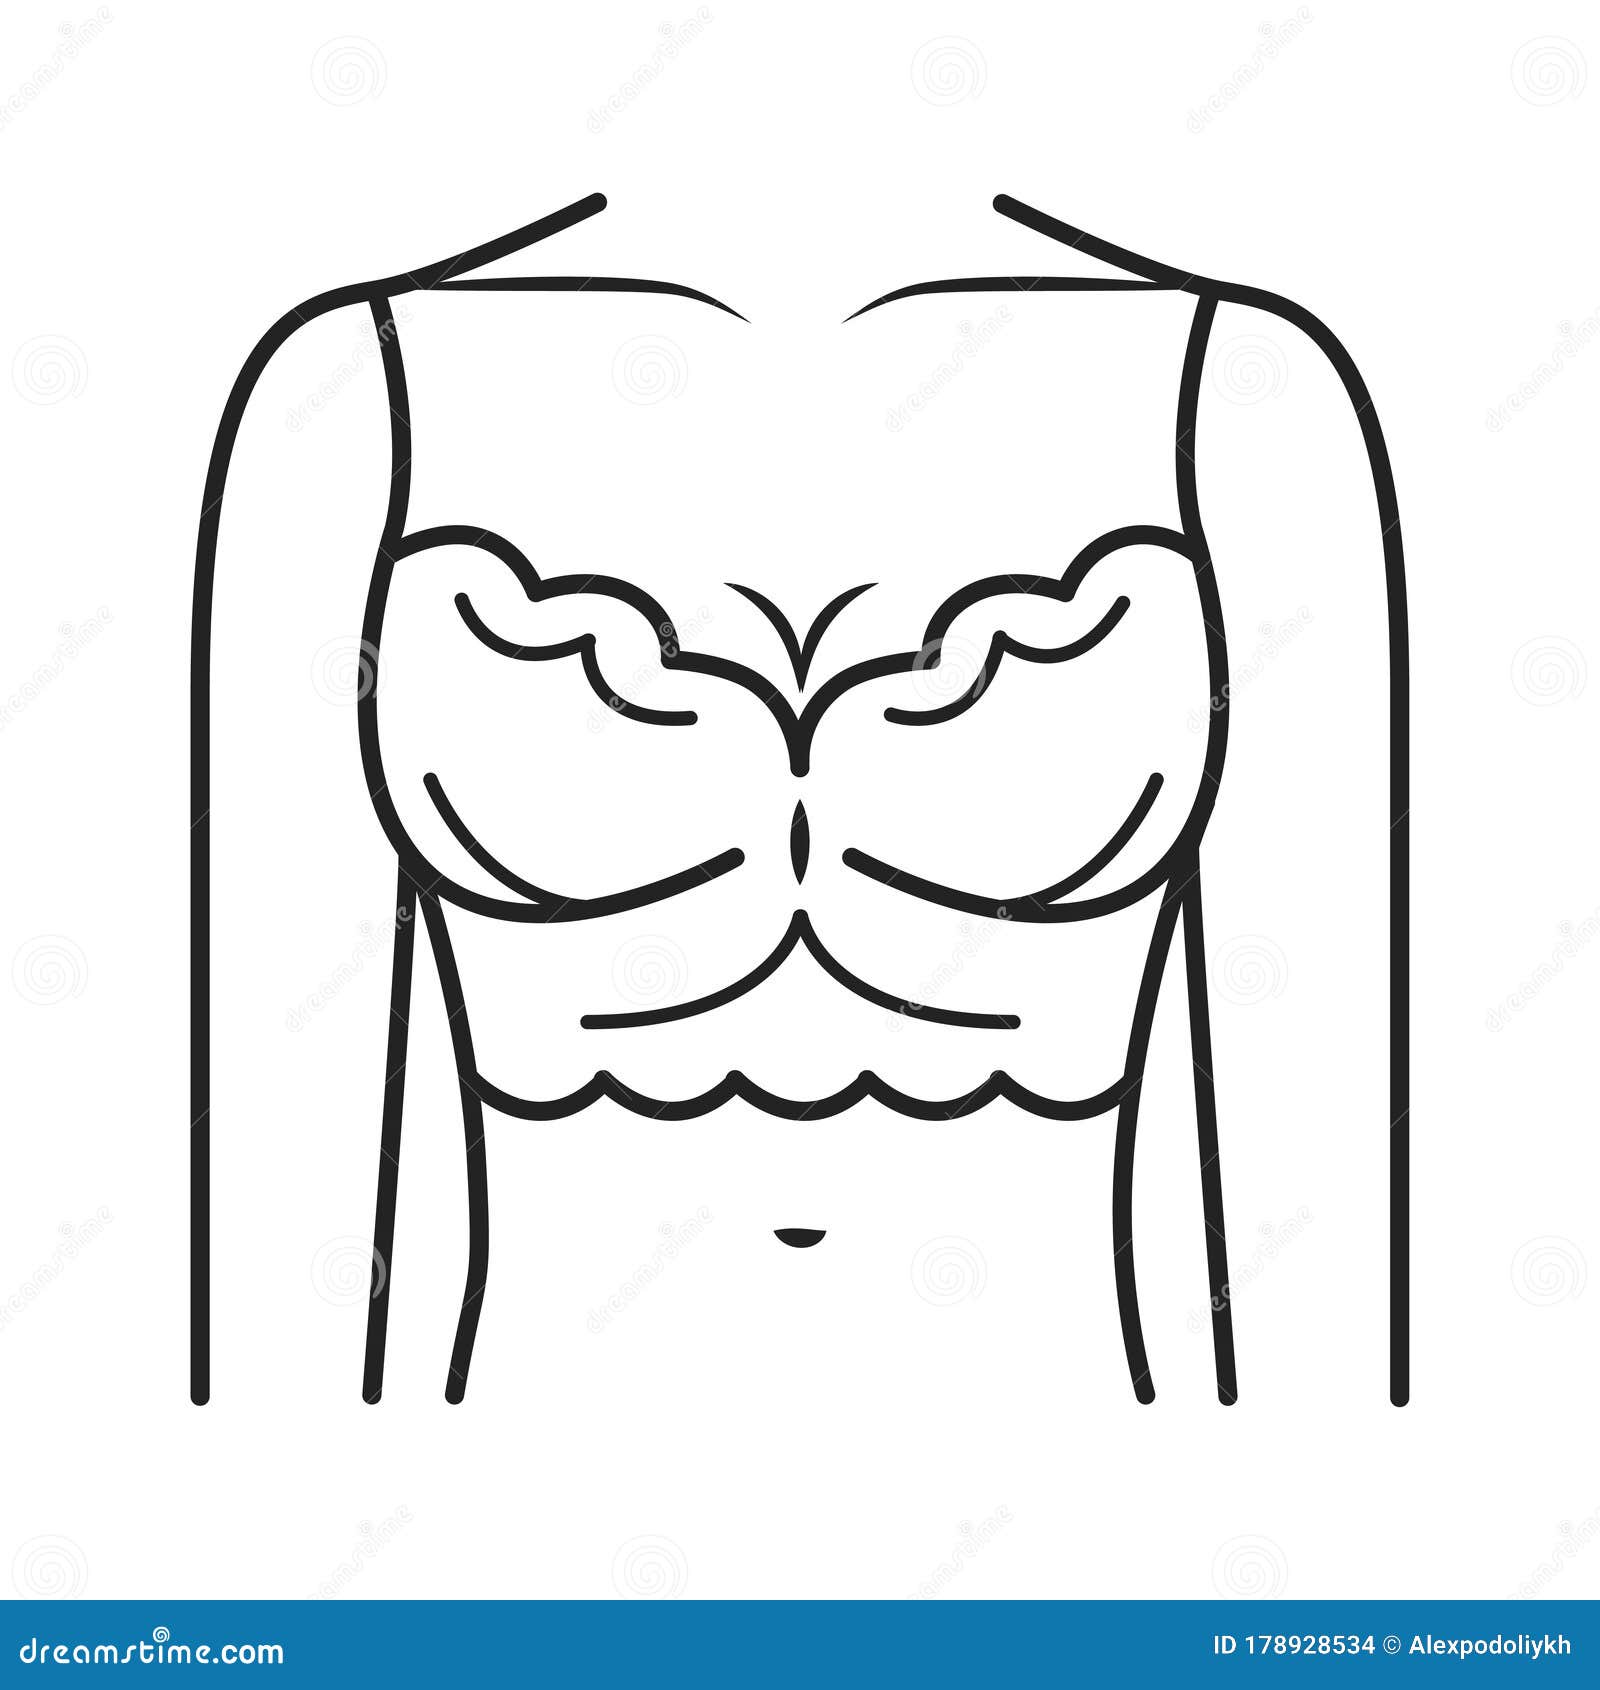 Bustier Lingerie Black Line Icon. Form Fitting Garment Used To Push Up the  Bust and To Shape the Waist Stock Illustration - Illustration of line,  clothes: 178928534